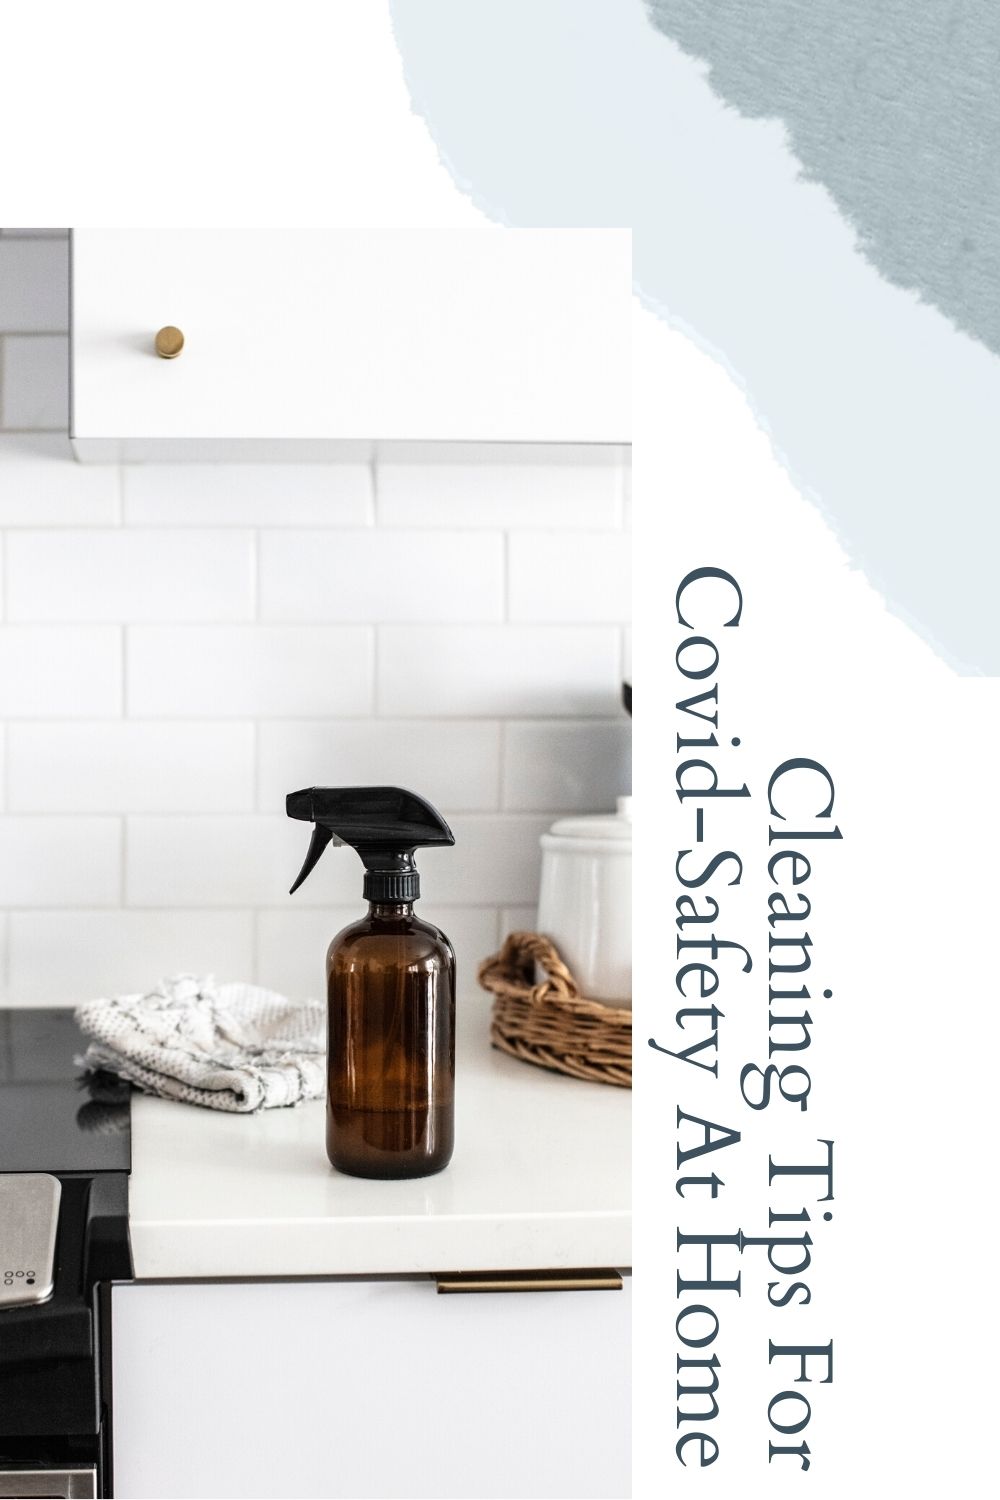 Cleaning Tips For Covid-Safety At Home